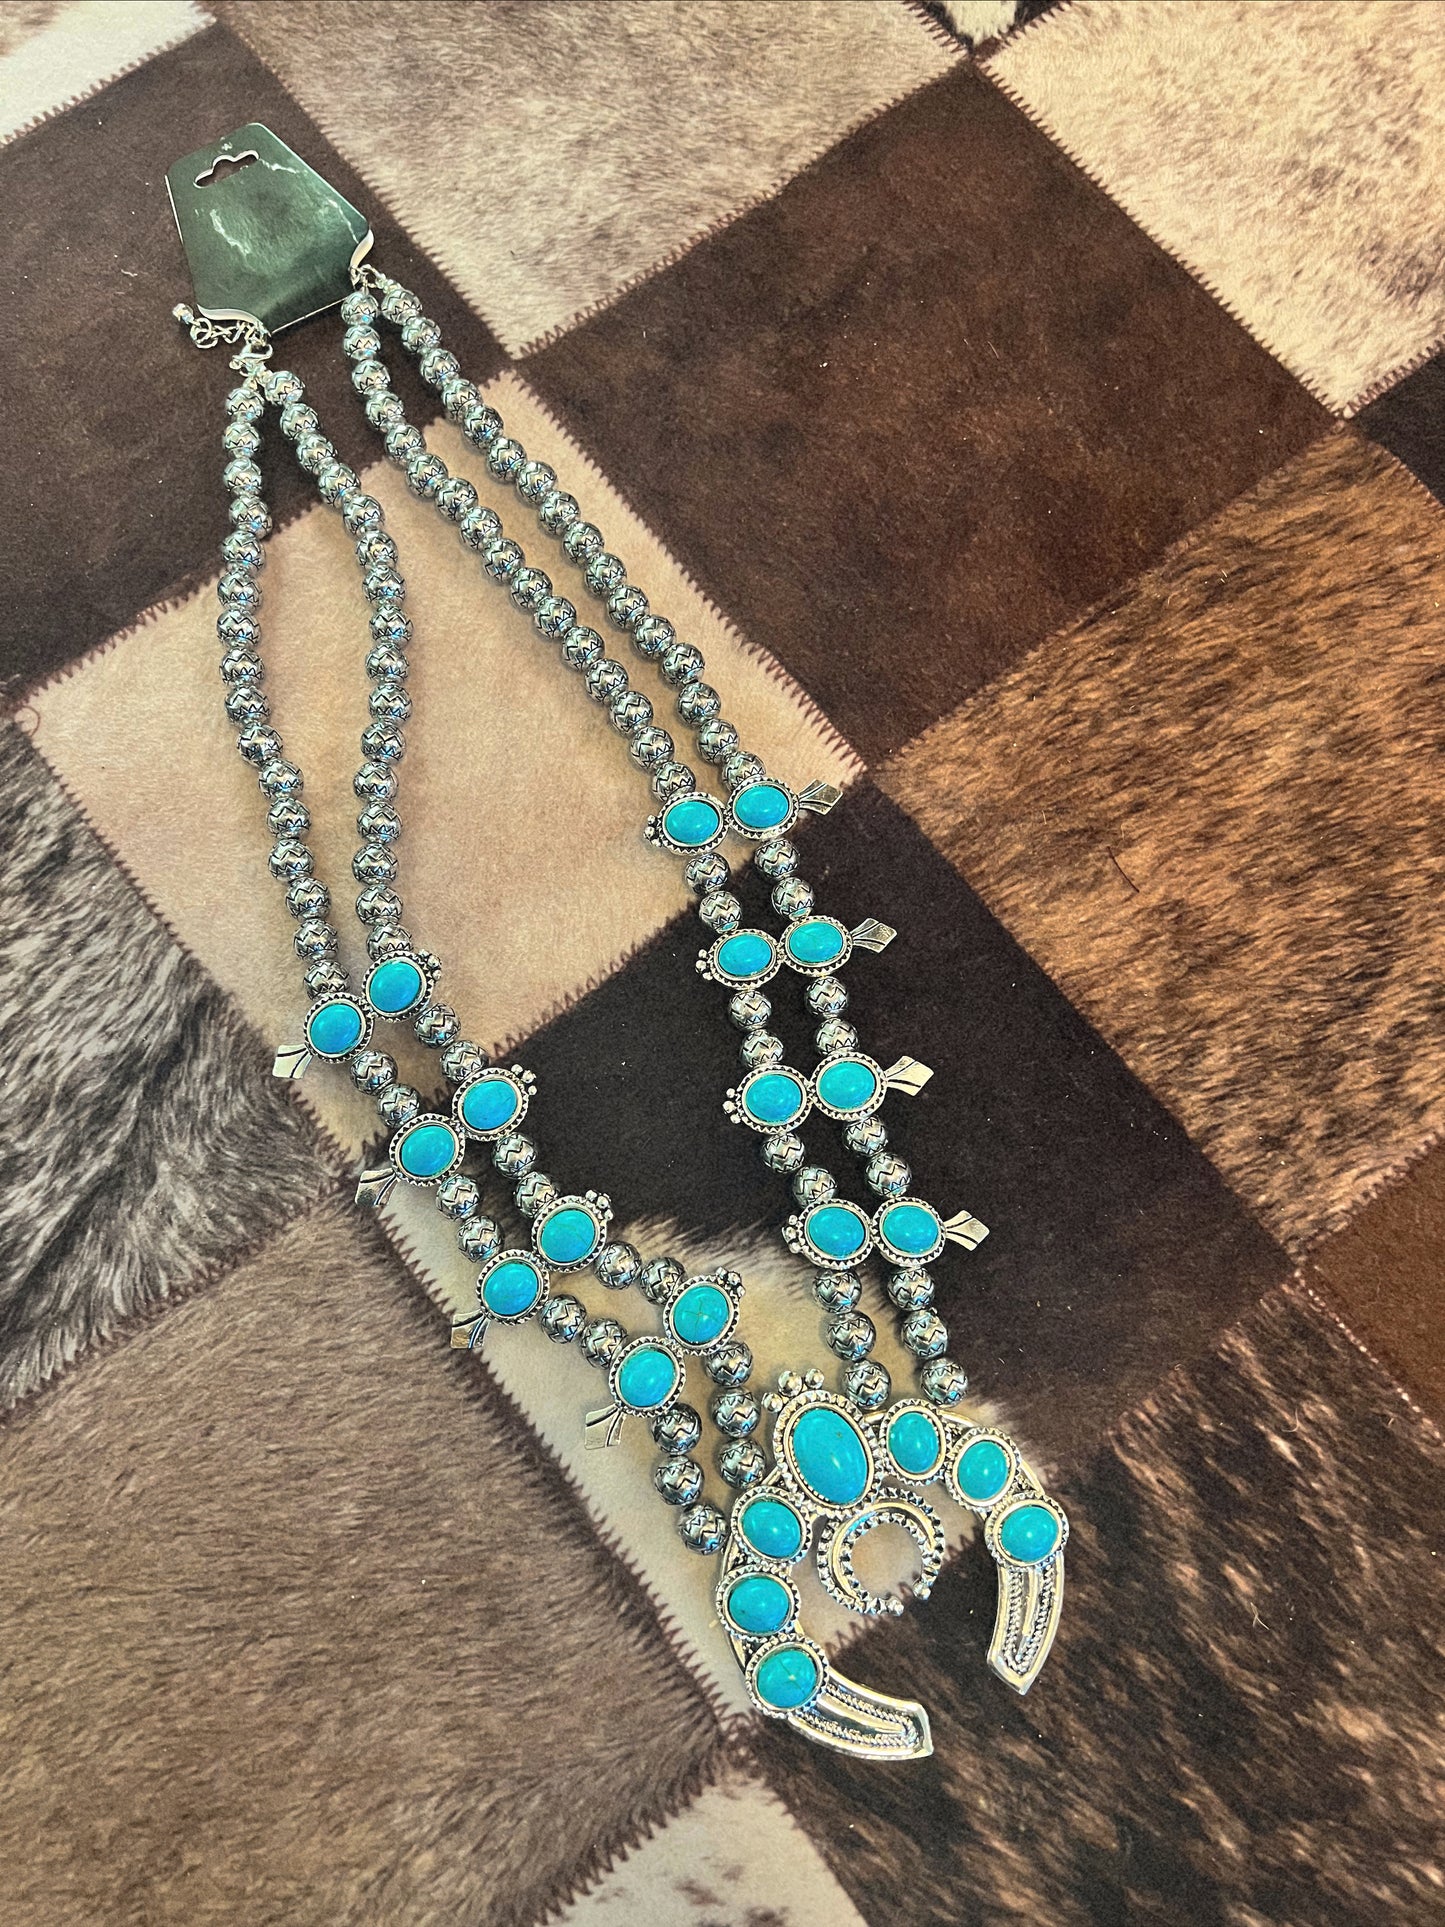 Turquoise Queen squash blossom necklace